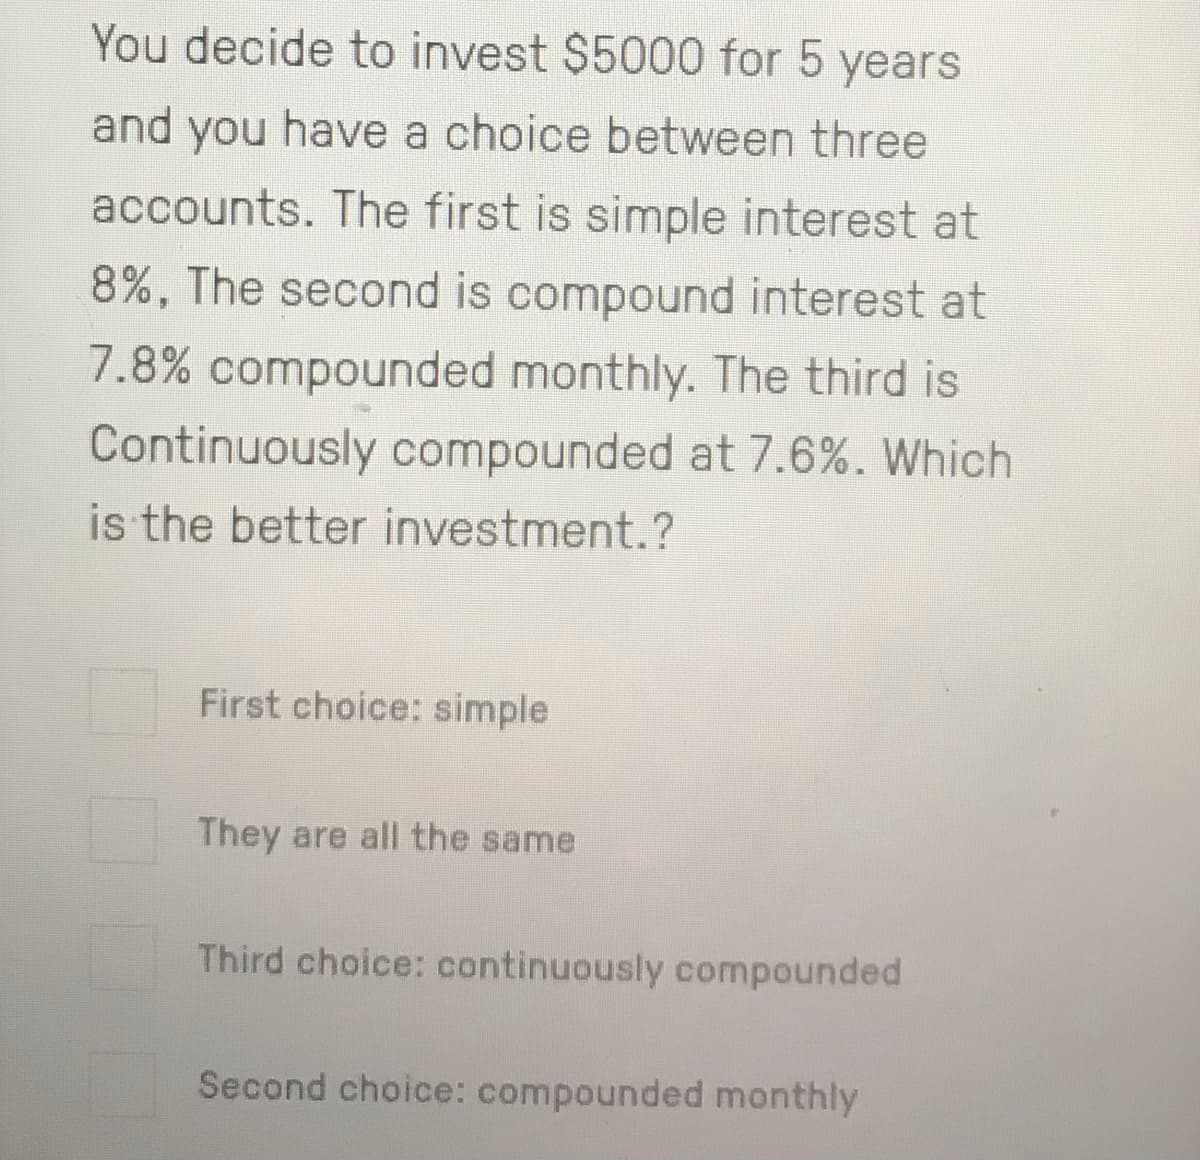 You decide to invest $5000 for 5 years
and you have a choice between three
accounts. The first is simple interest at
8%, The second is compound interest at
7.8% compounded monthly. The third is
Continuously compounded at 7.6%. Which
is the better investment.?
First choice: simple
They are all the same
Third choice: continuously compounded
Second choice: compounded monthly
